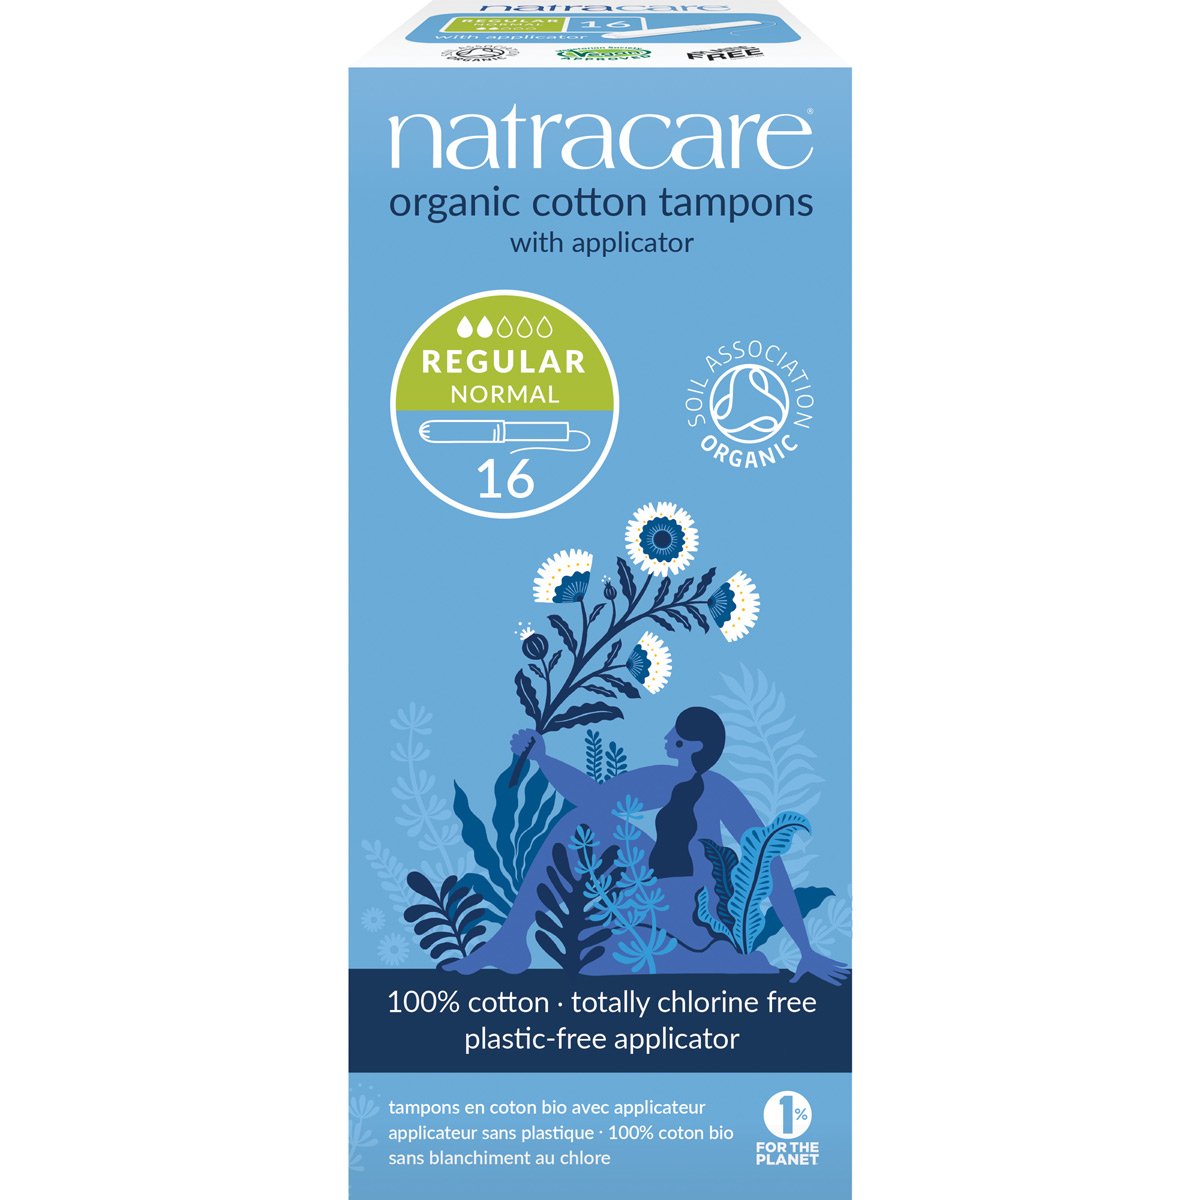 Natracare Organic Cotton Tampons with Applicator - Regular - Pack of 16